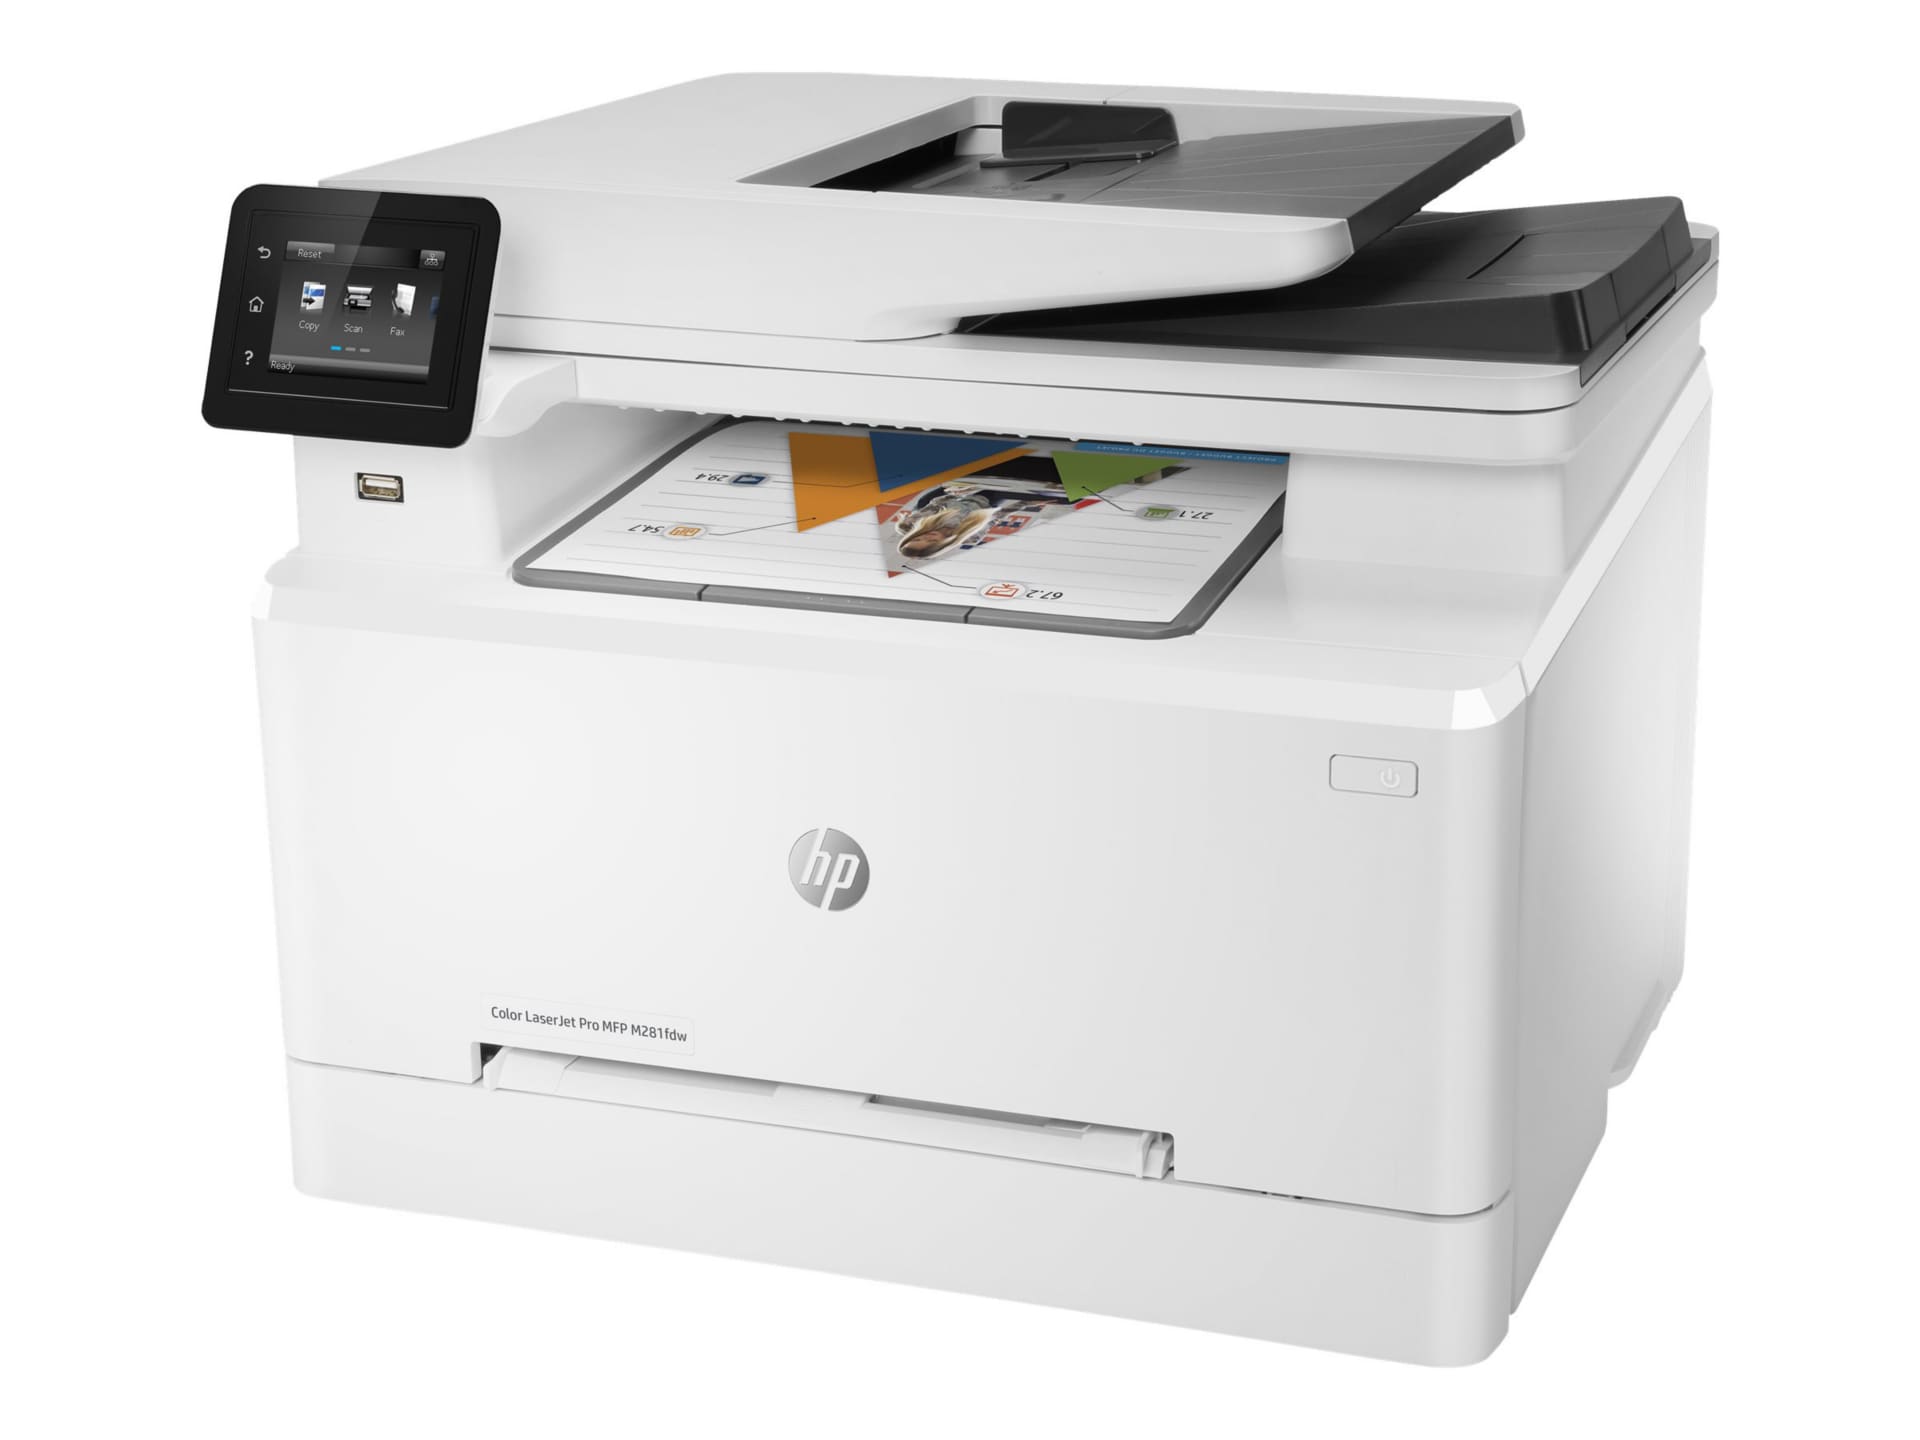 https://www.cdwg.com/content/cdwg/en/products/printers-scanners-print-supplies.html